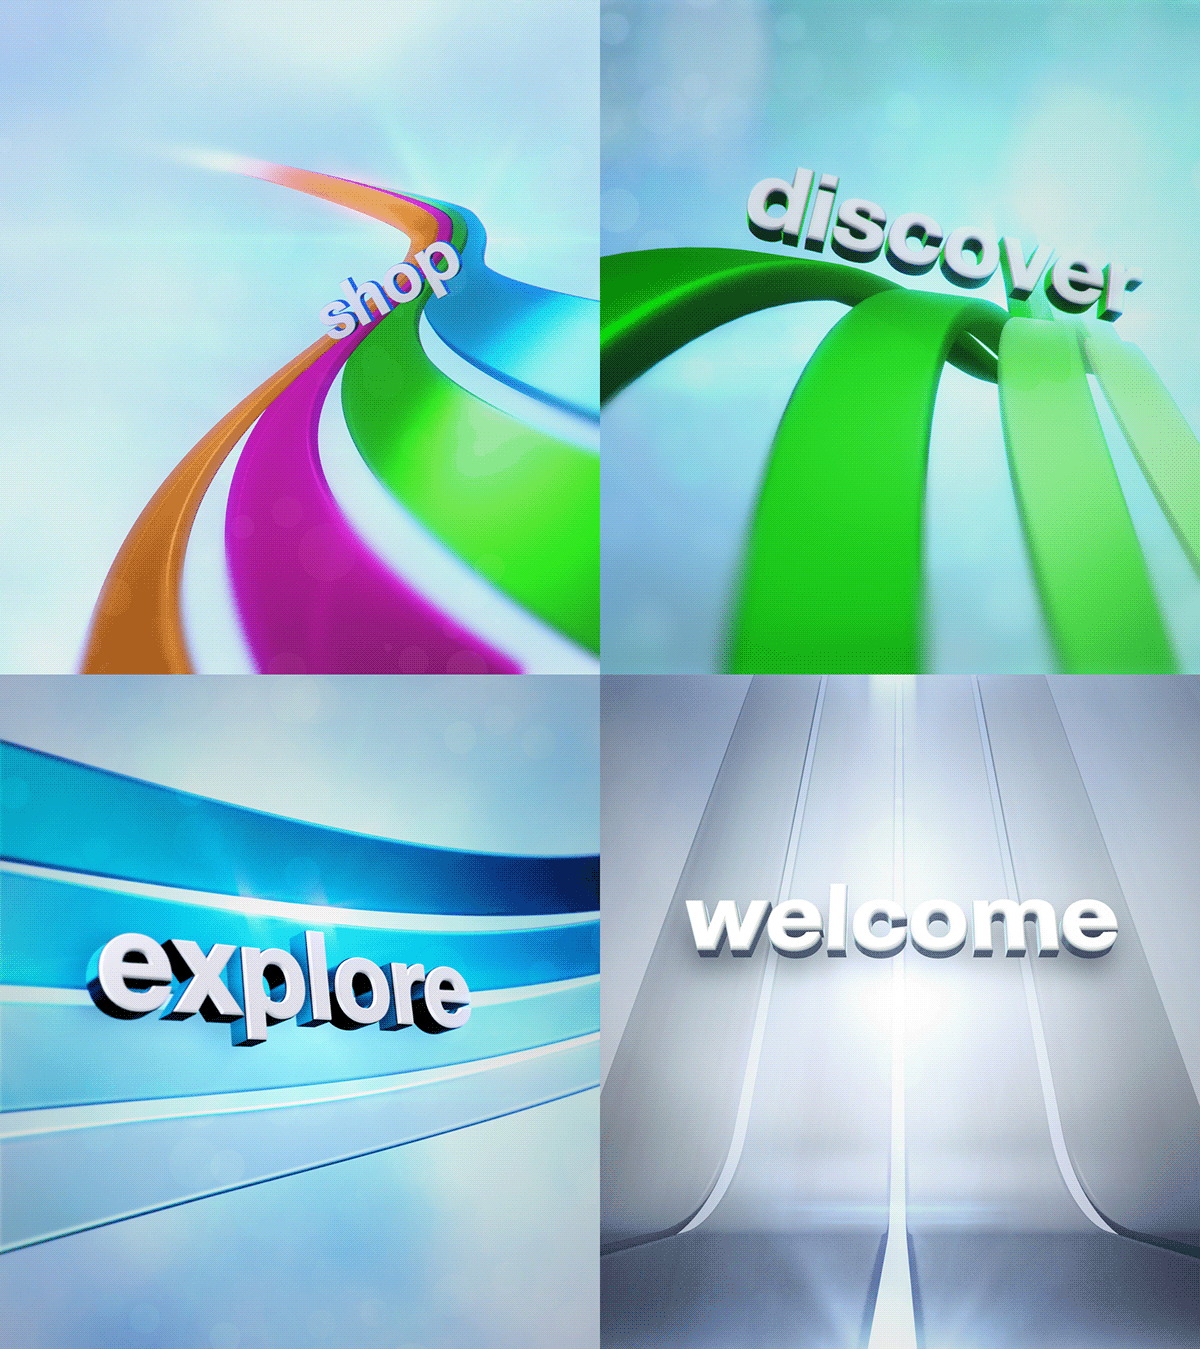 styleframes Style Frames Previz promos broadcast concepts roughs after effects photoshop